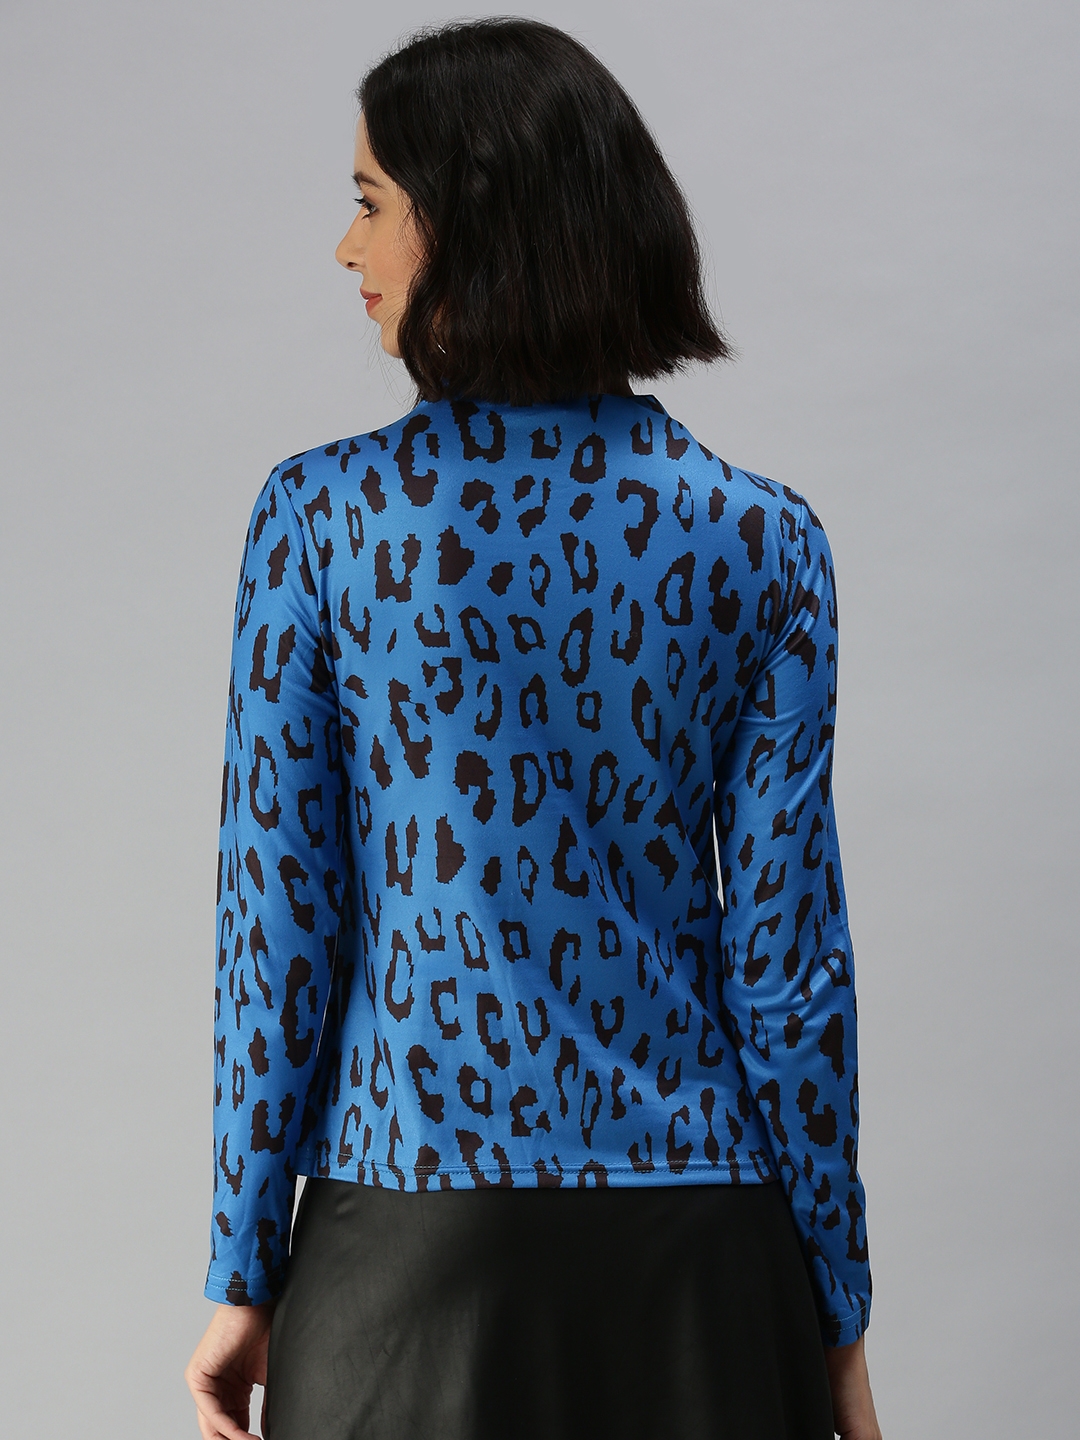 Women's Blue Polyester Printed Tops